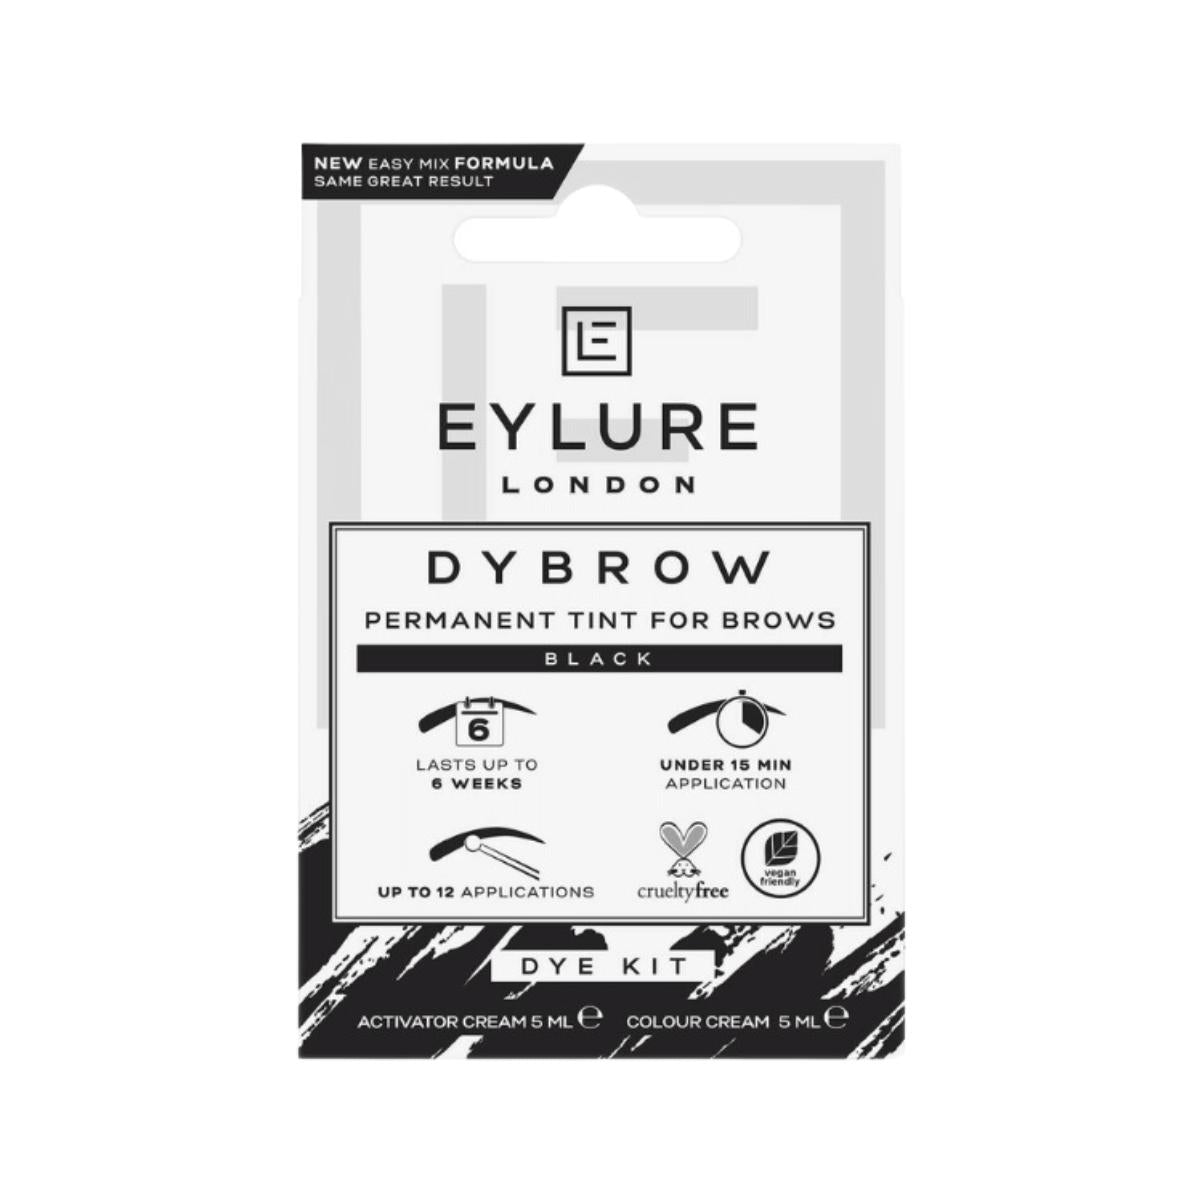 Eylure Dybrow Tint For Brows Black